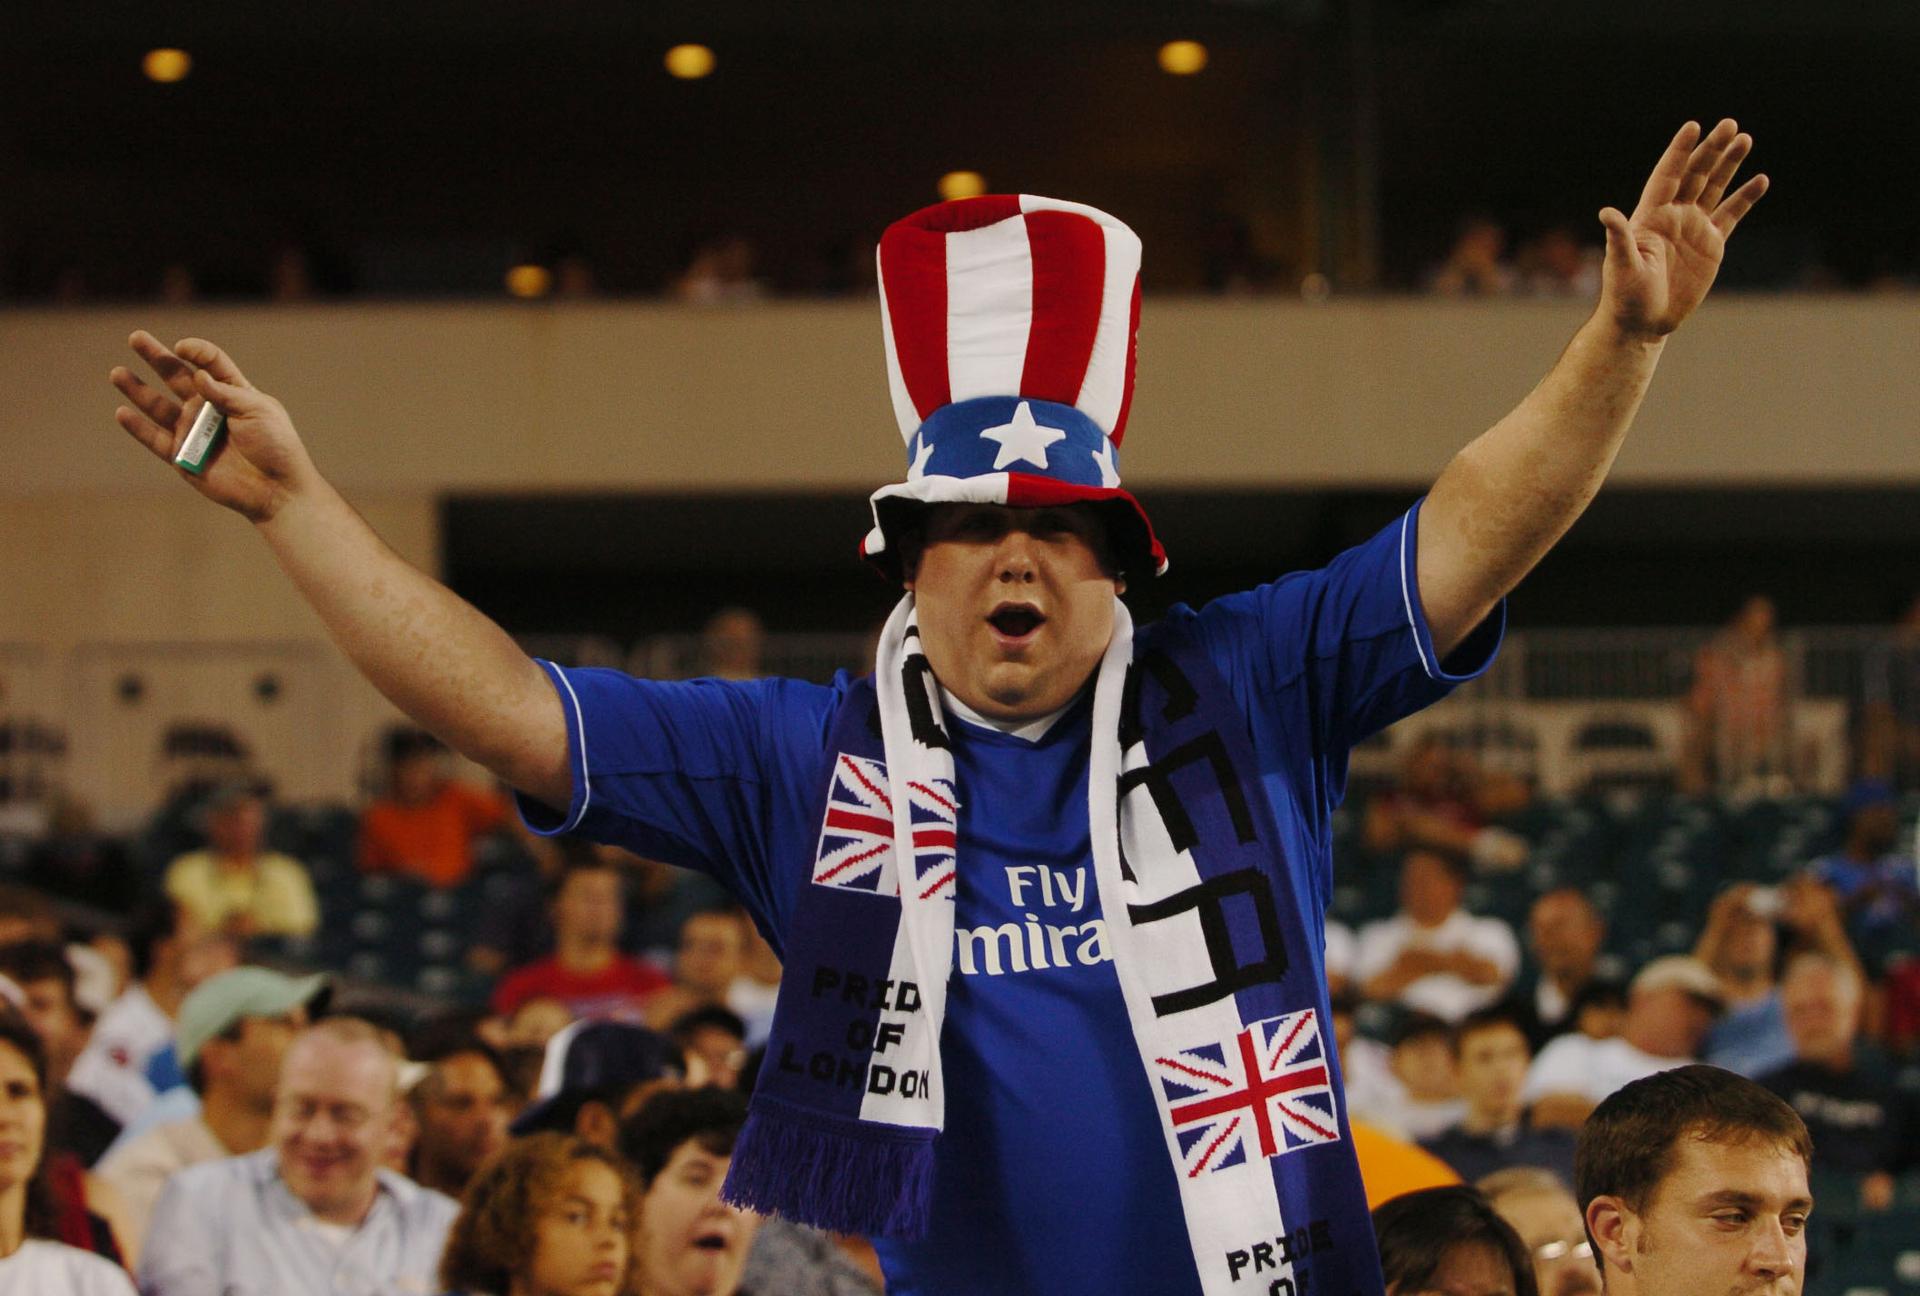 A cheering football fan in a loud hat with American colors